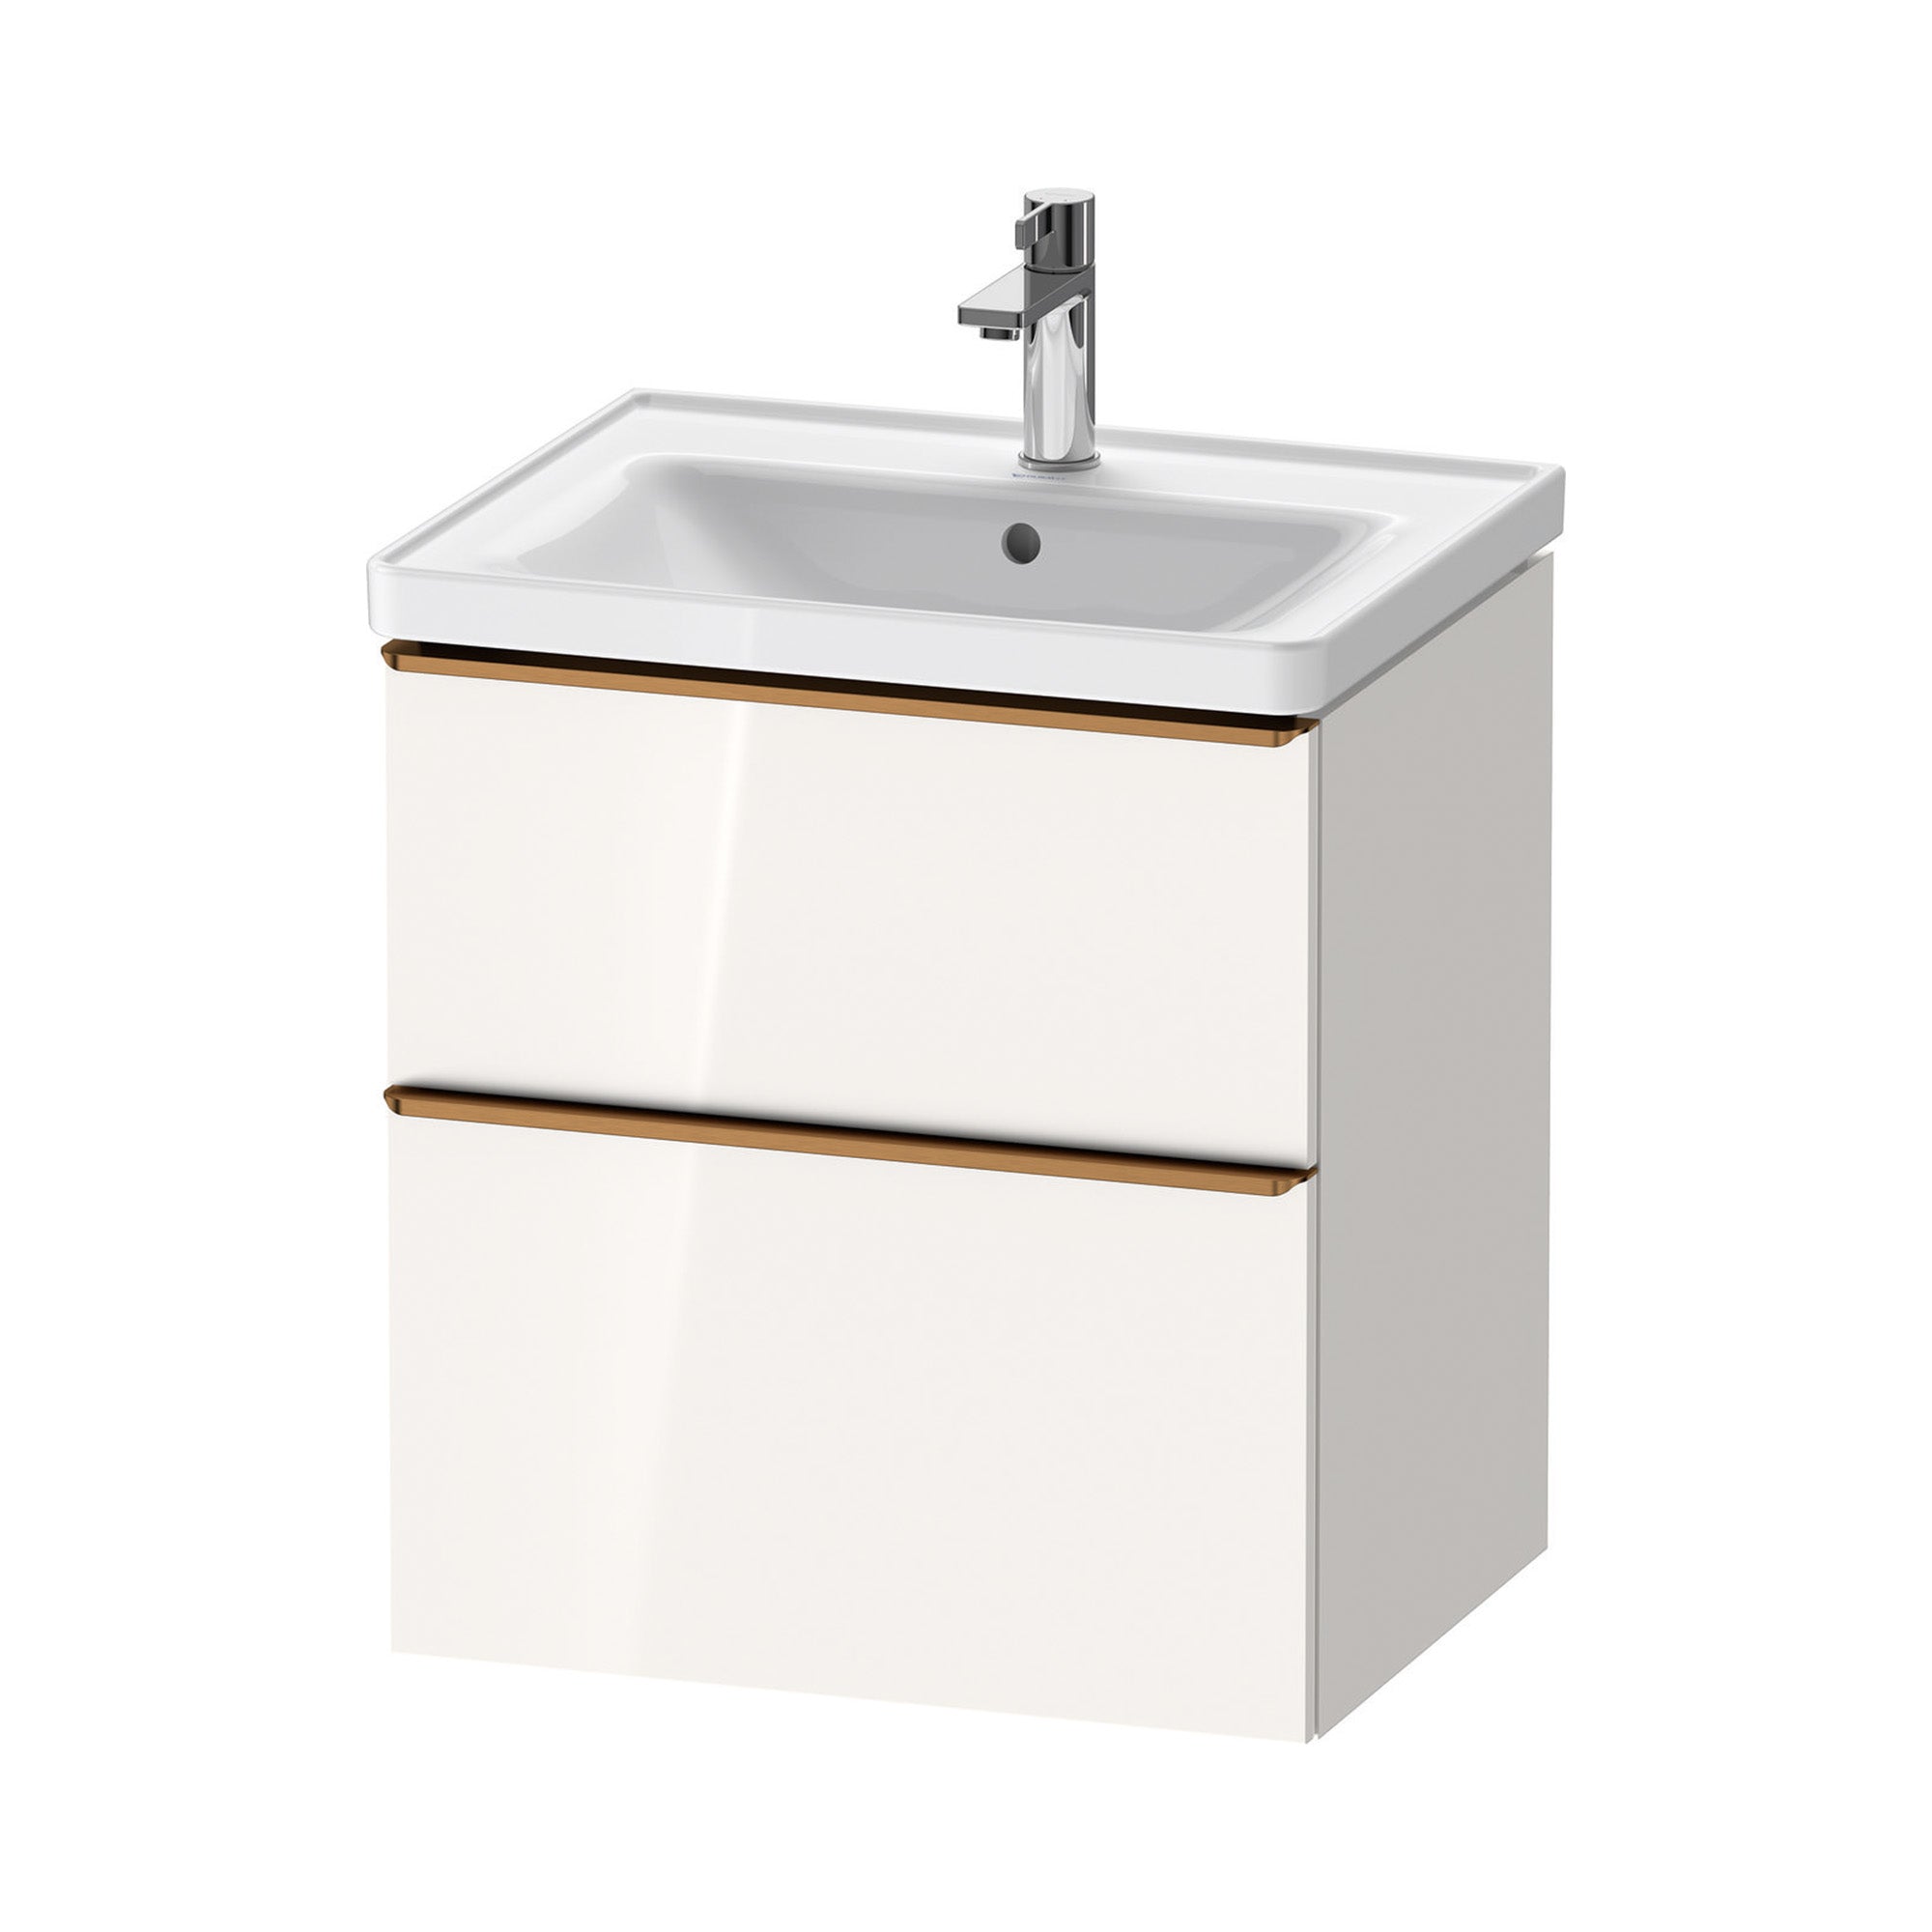 duravit d-neo 600 wall mounted vanity unit with d-neo basin gloss white brushed bronze handles